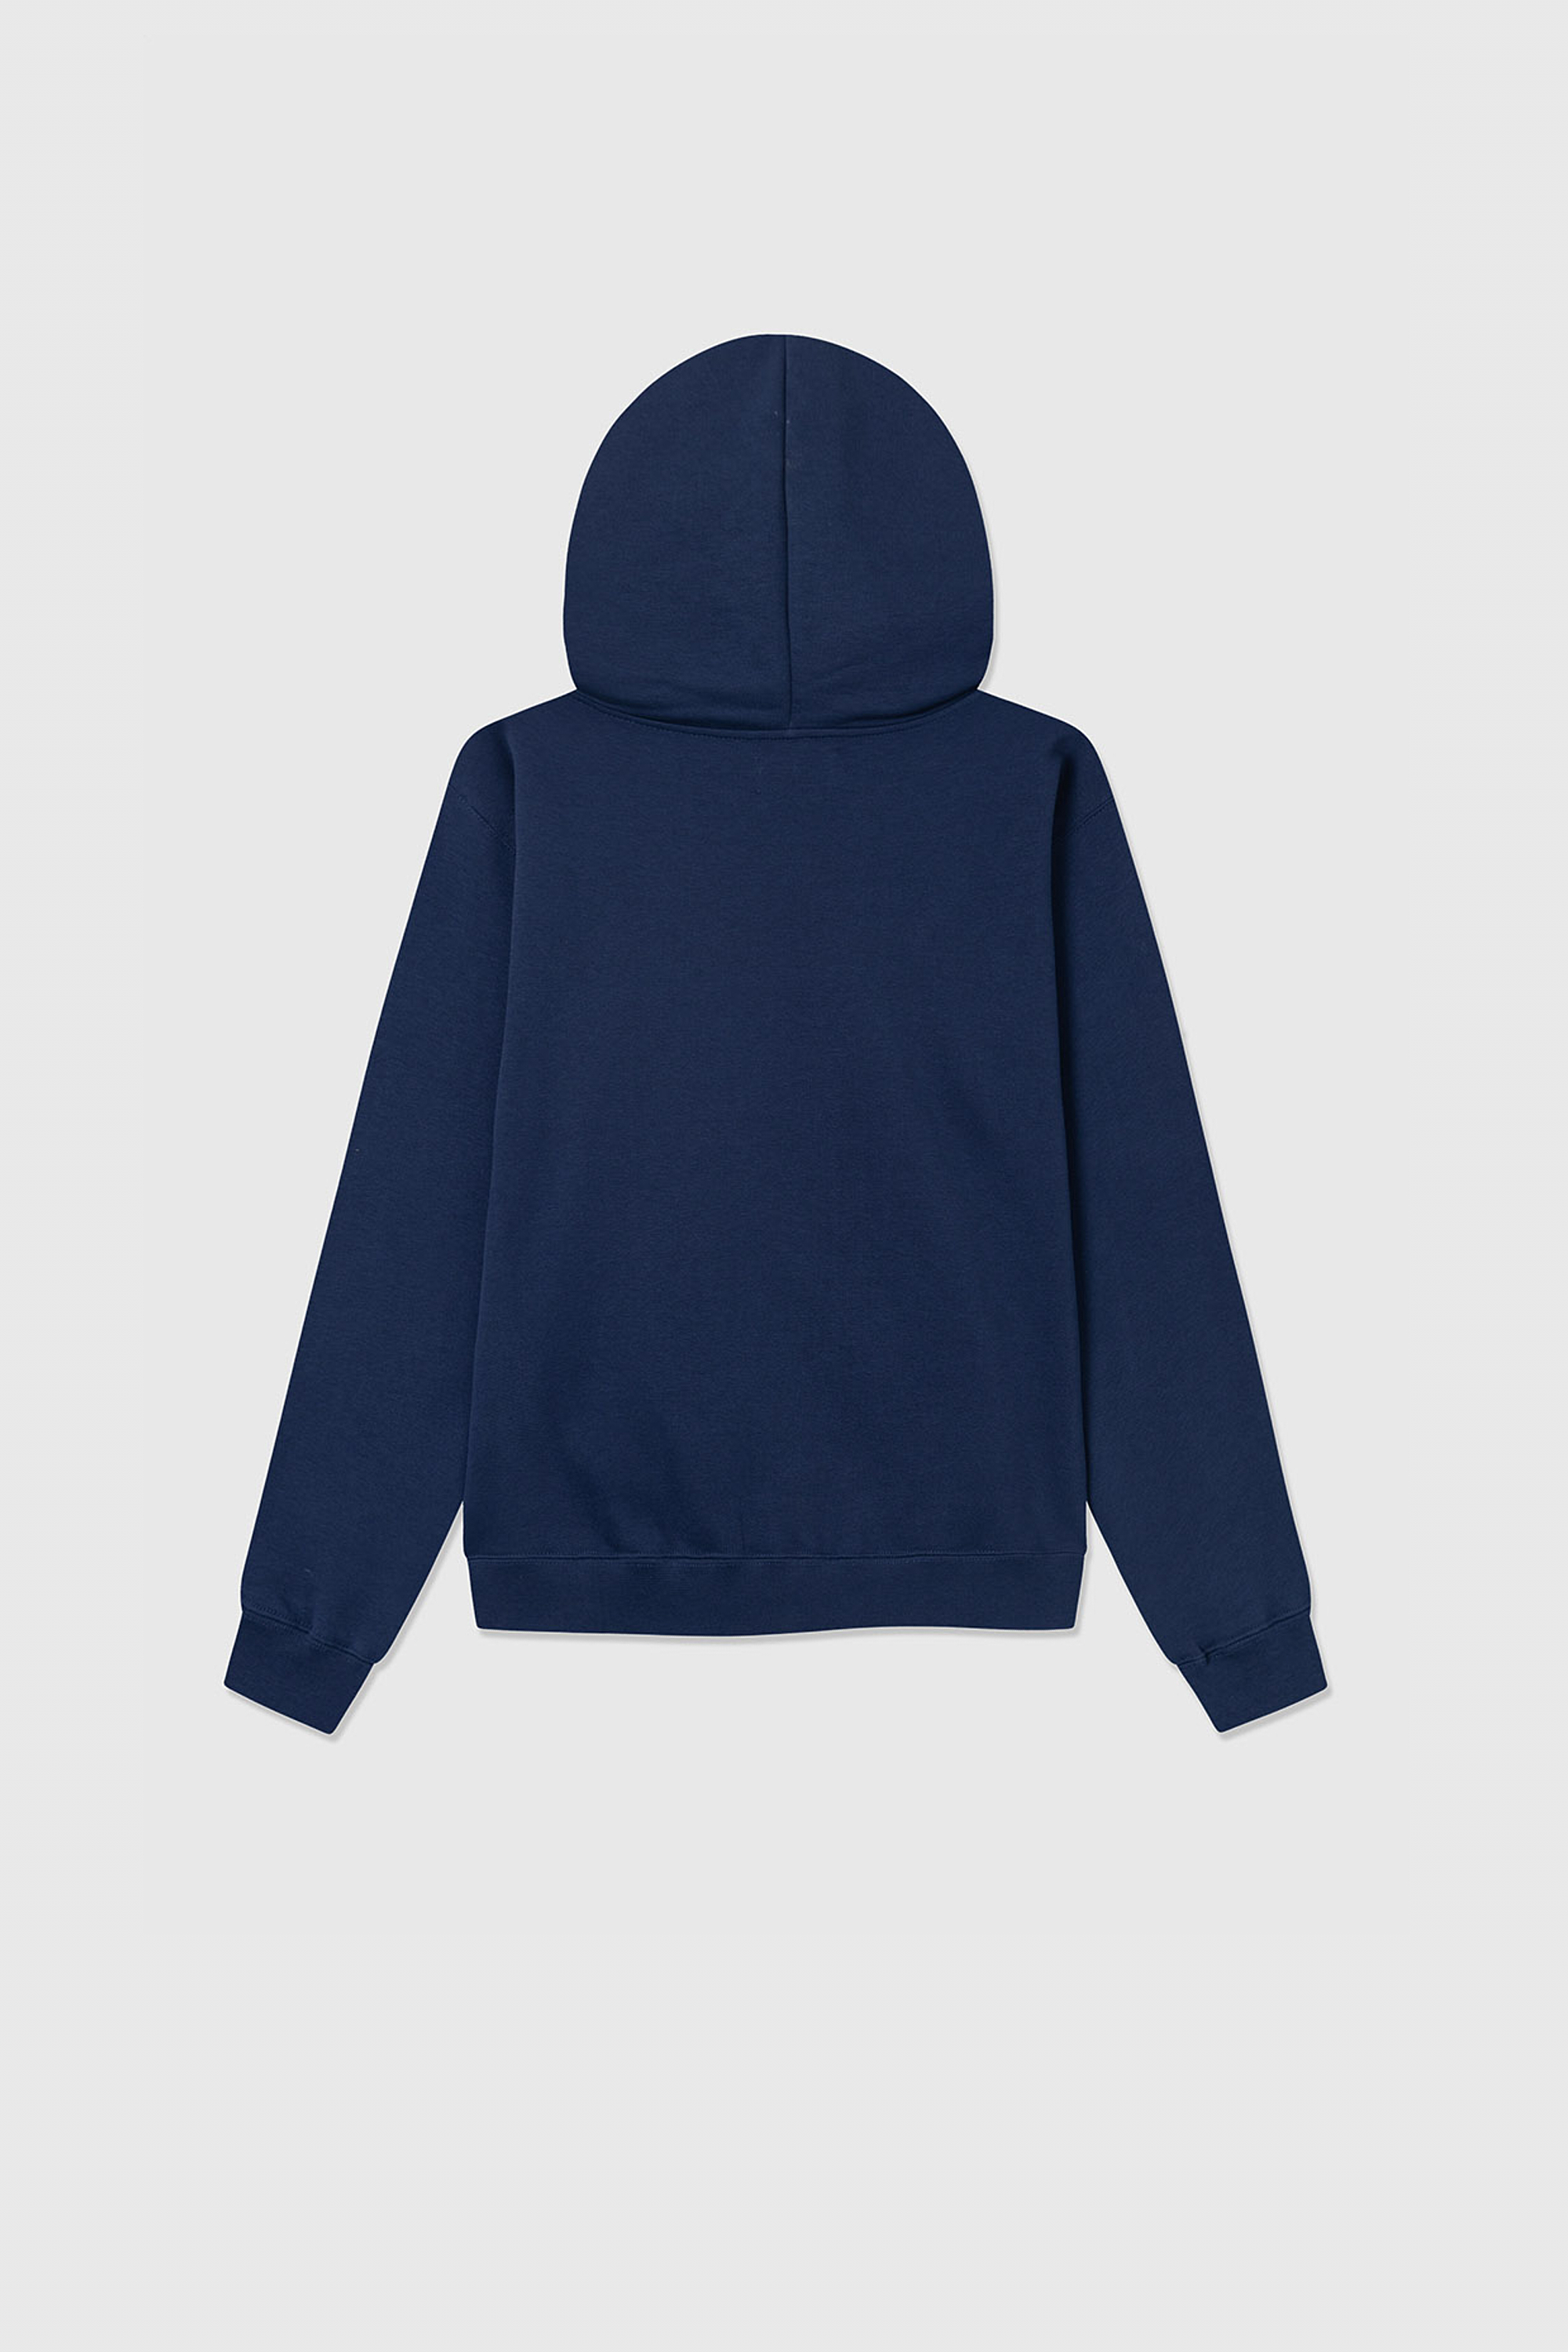 Double A by Wood Wood Ian doggy patch hoodie Navy | WoodWood.com